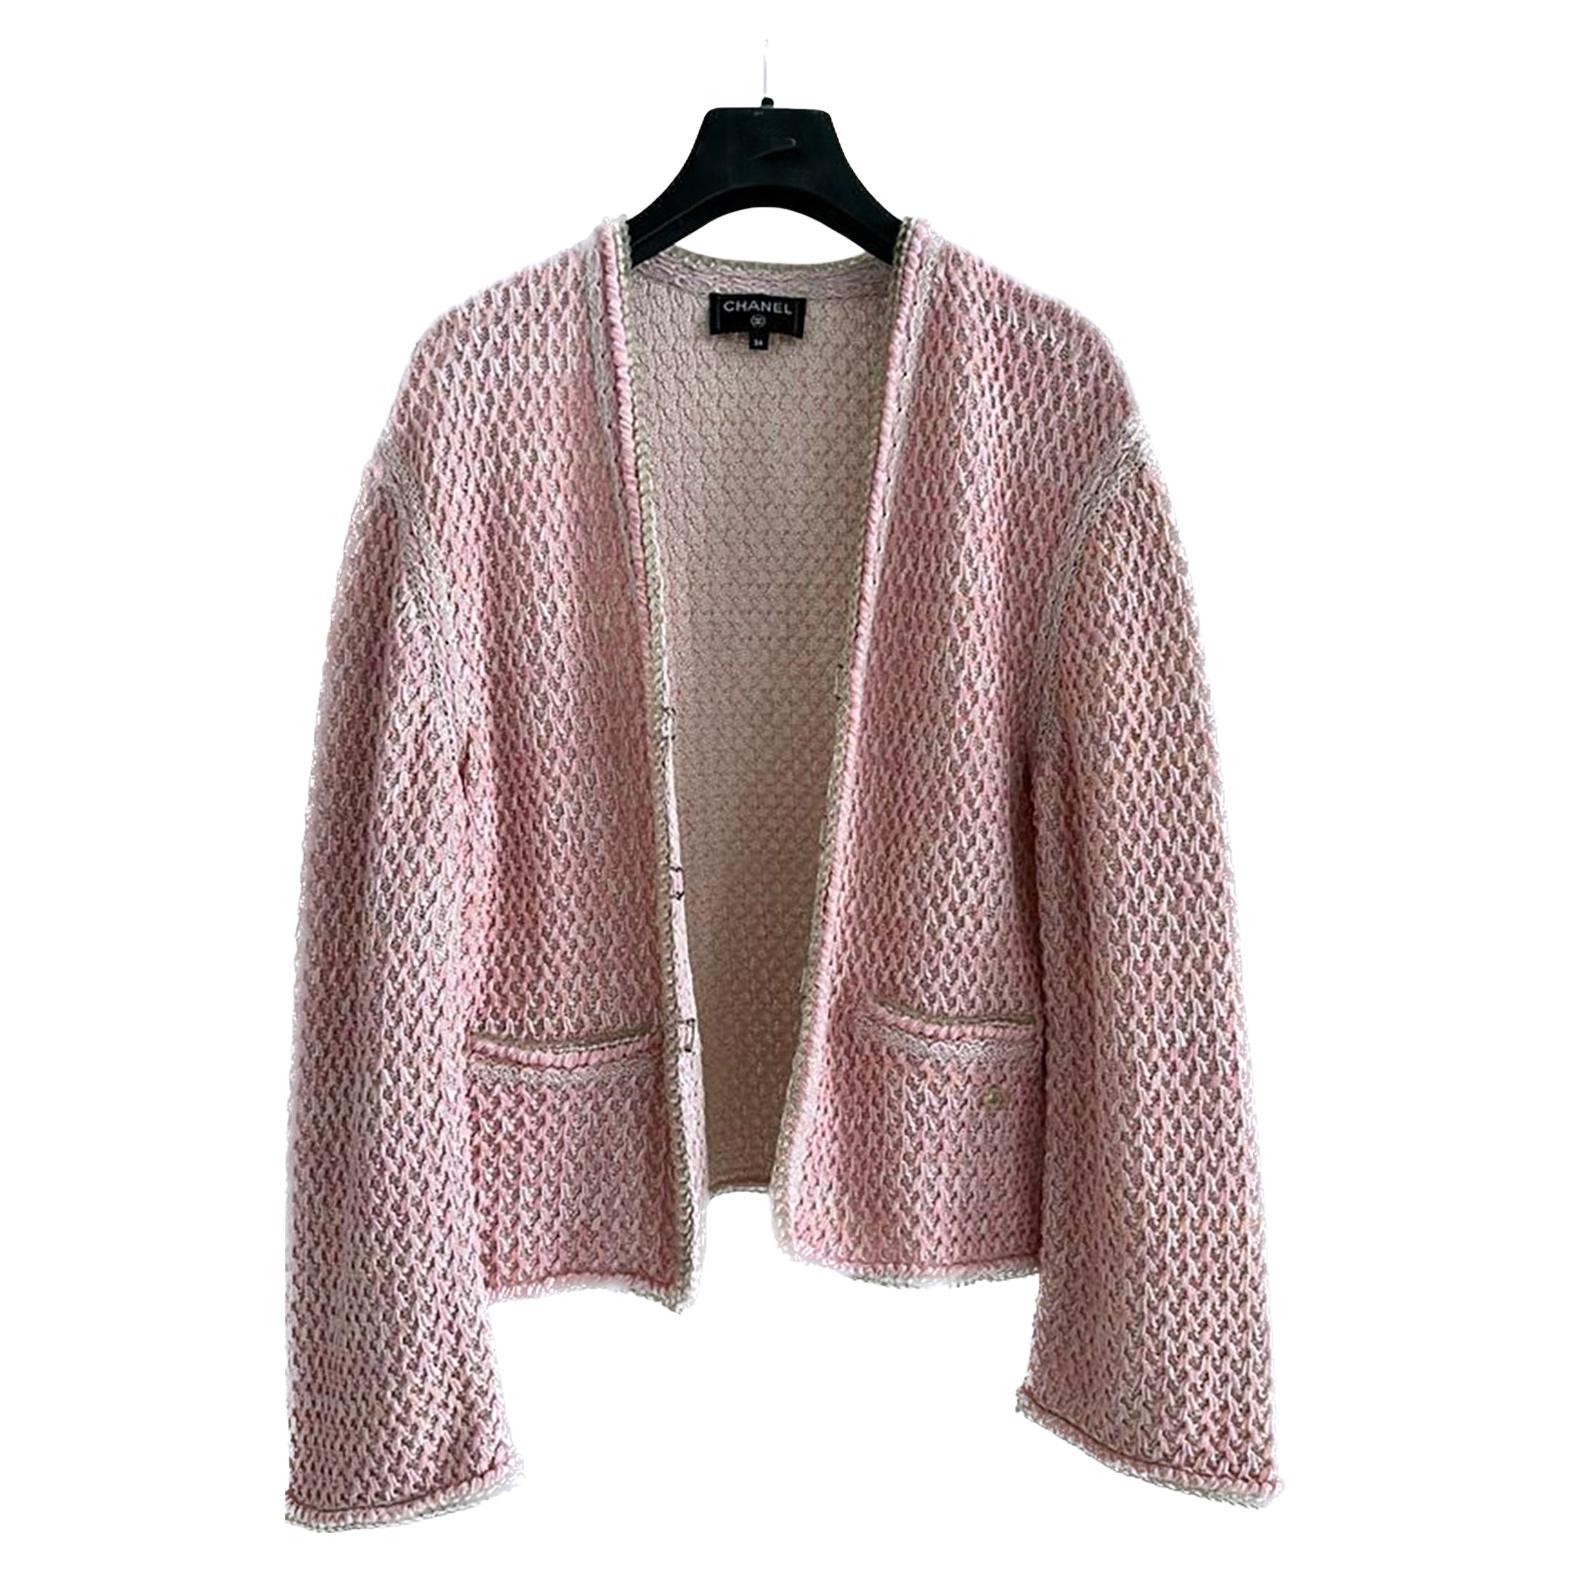 Chanels New Bouclé Jackets Turn Classic On Its Head  British Vogue